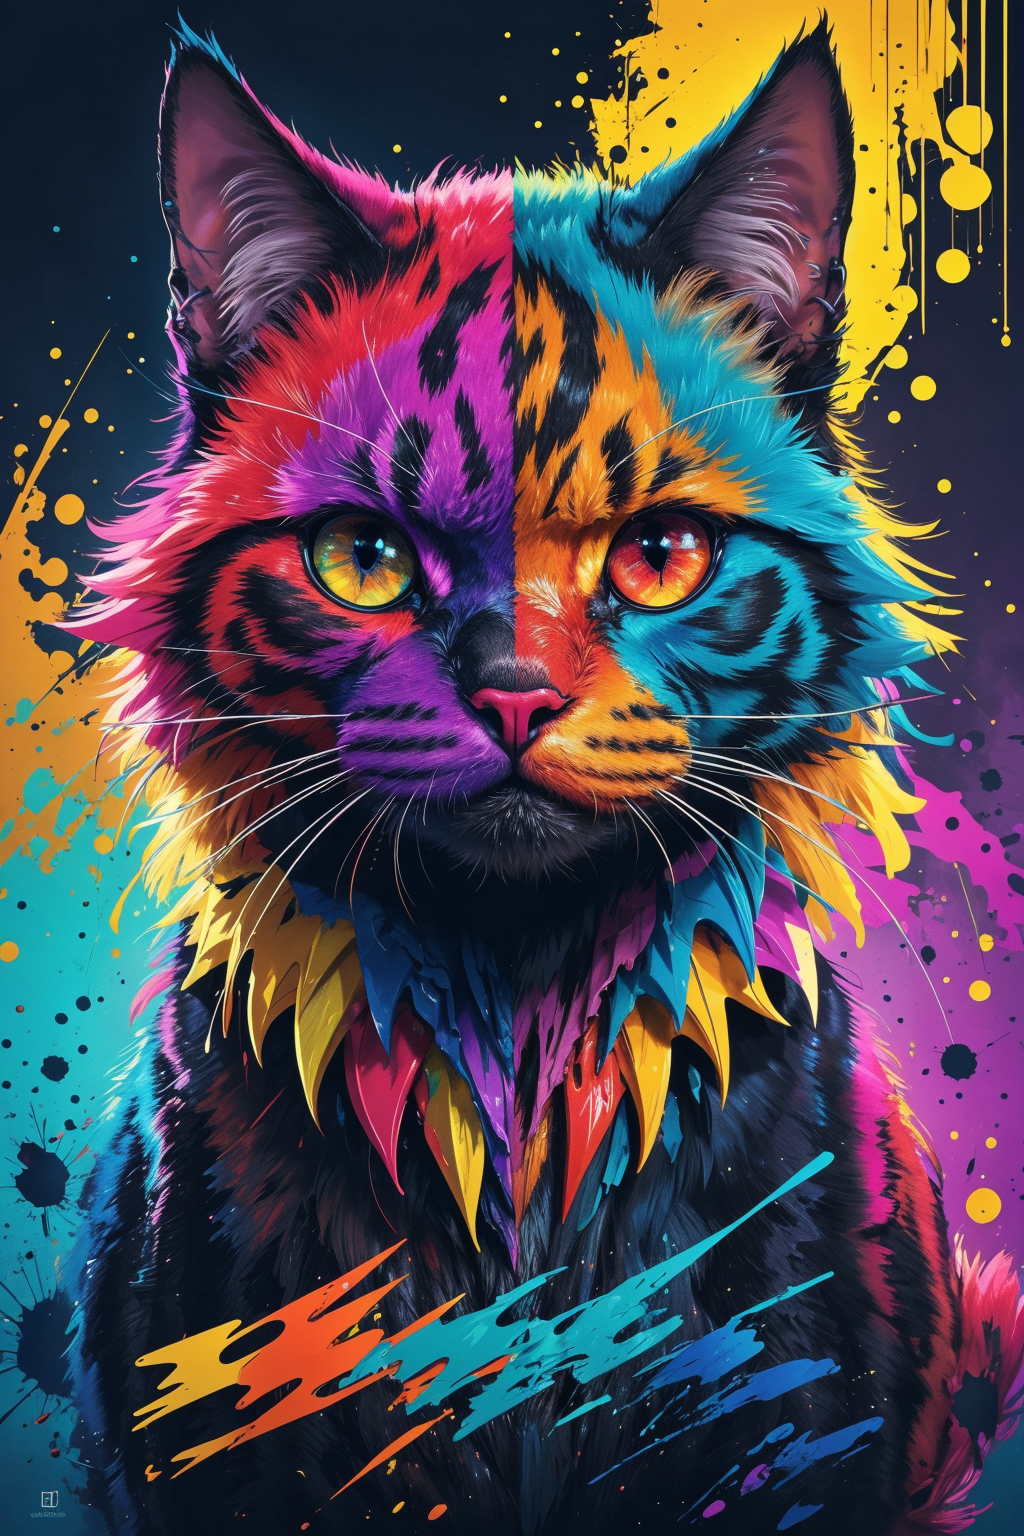 extreme quality, cg, detailed face+eyes, (bright colors), splashes of color background, colors mashing, paint splatter, co...